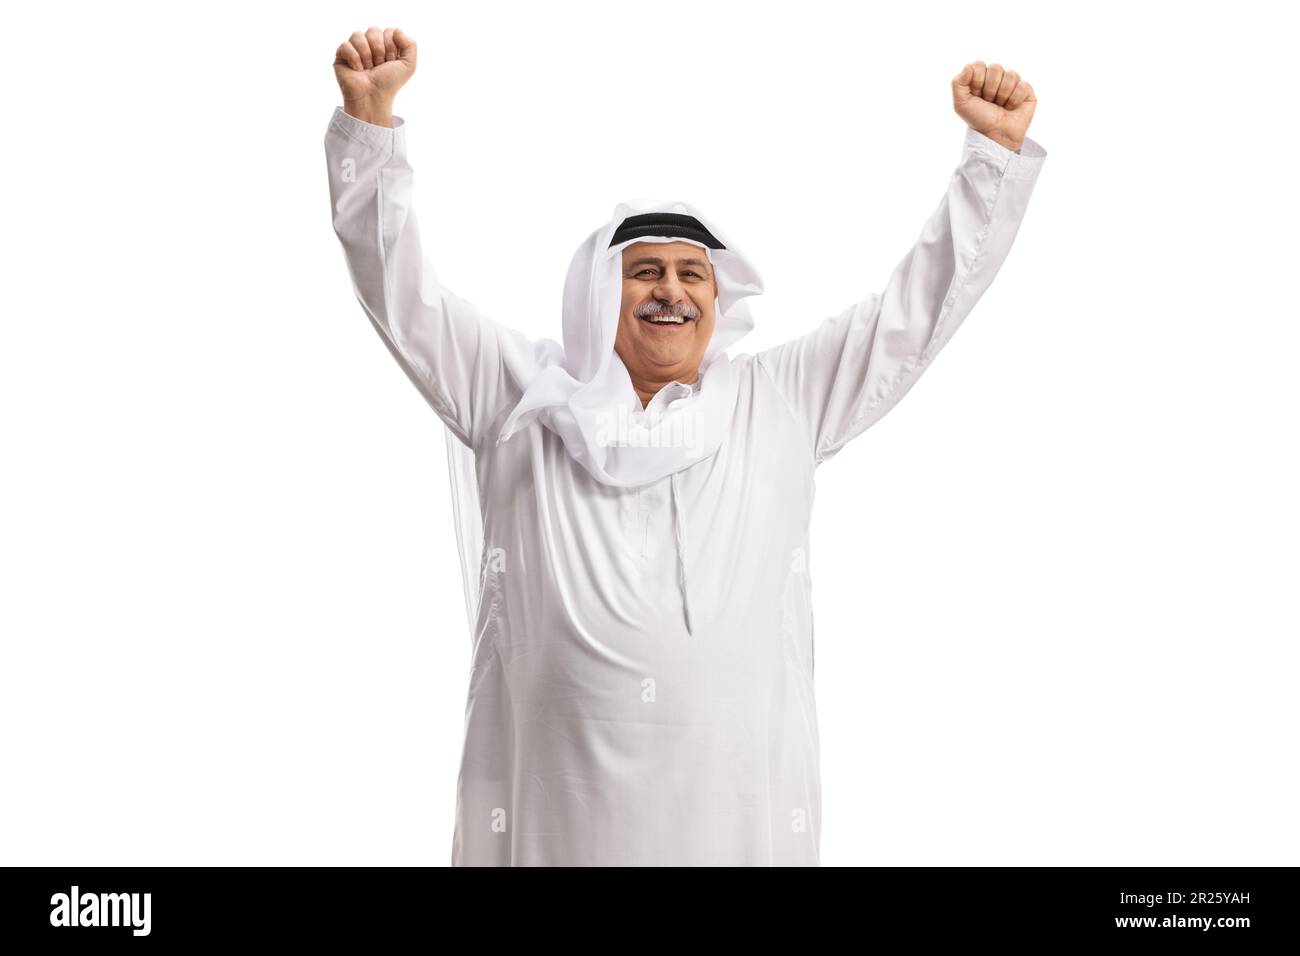 Excited mature arab man gesturing happiness isolated on white background Stock Photo